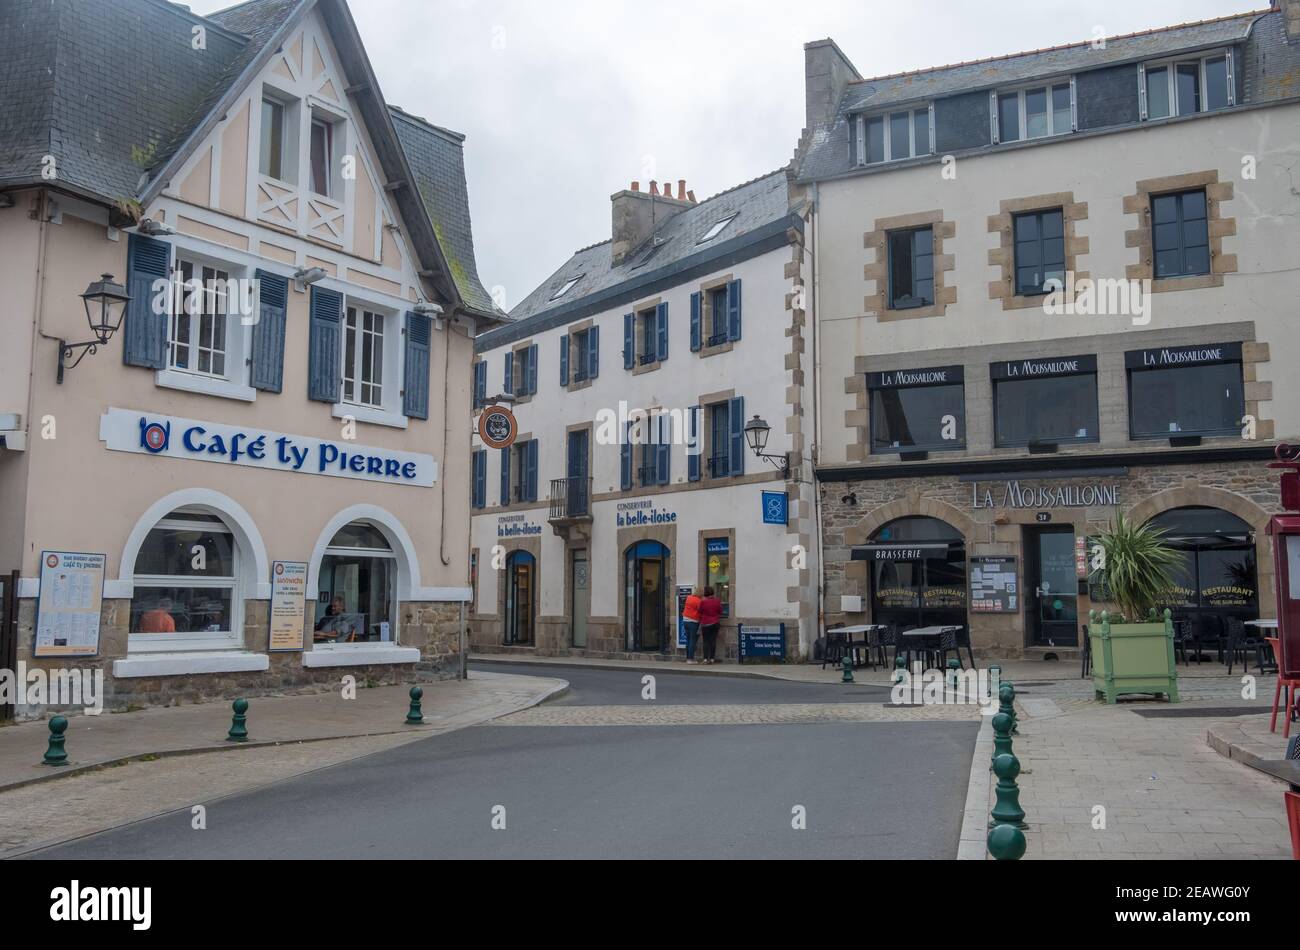 Roscoff, France - August 28, 2019: Cityscape of the medieval city Roscoff, a popular tourist destination in Finistere departement of Brittany Stock Photo